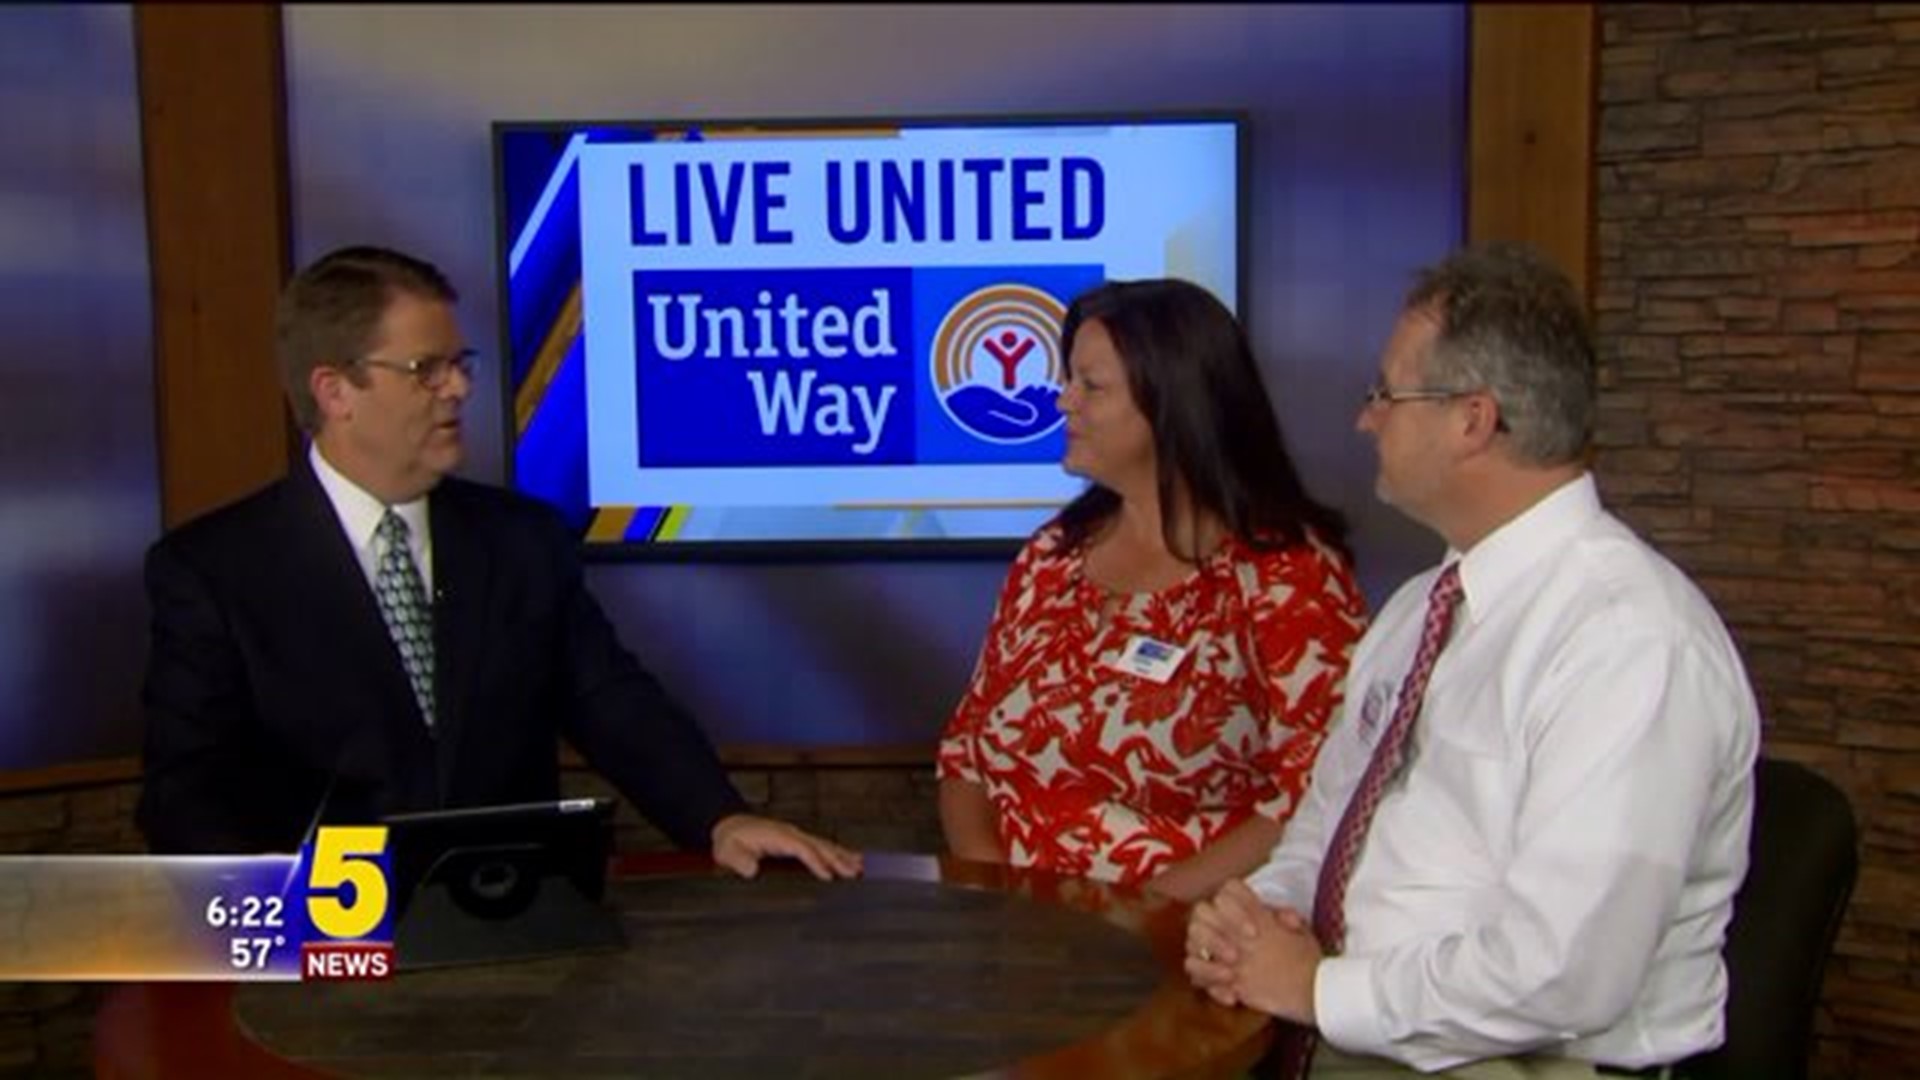 UNITED WAY OF FORT SMITH